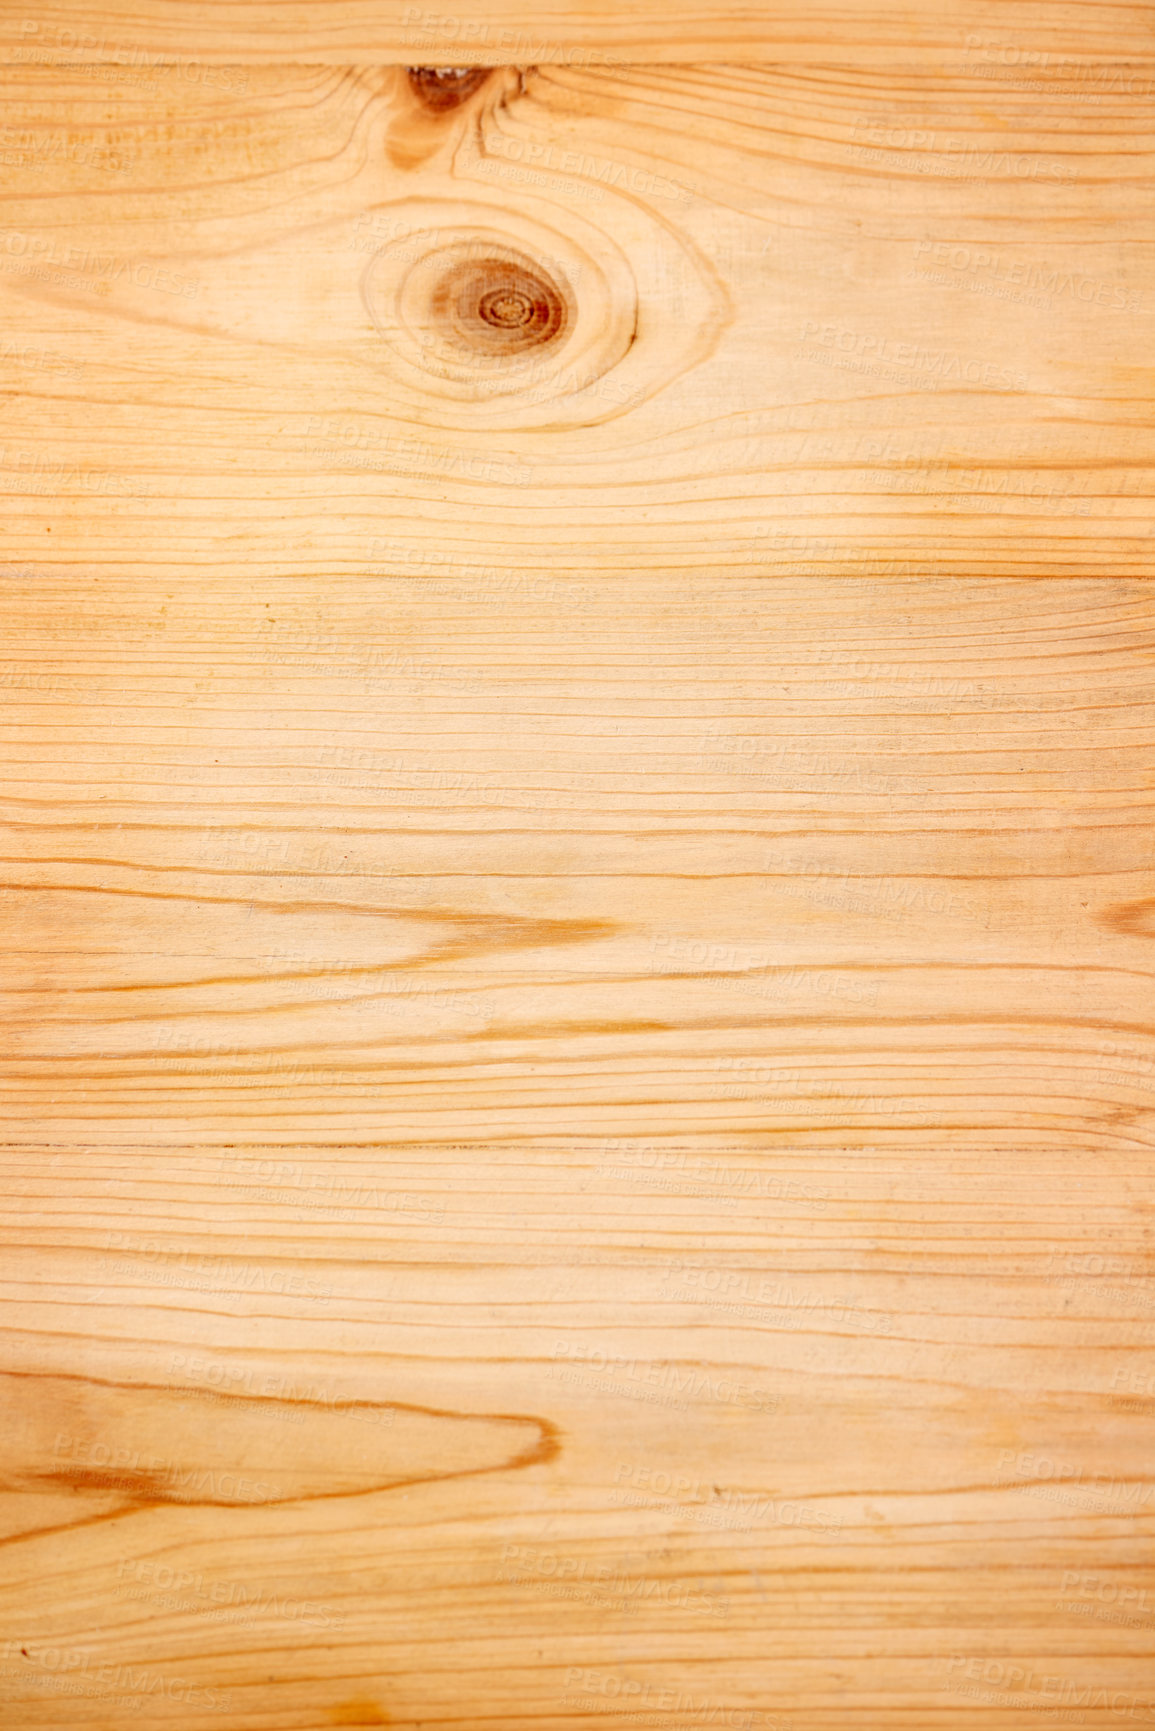 Buy stock photo Closeup shot of a wooden background